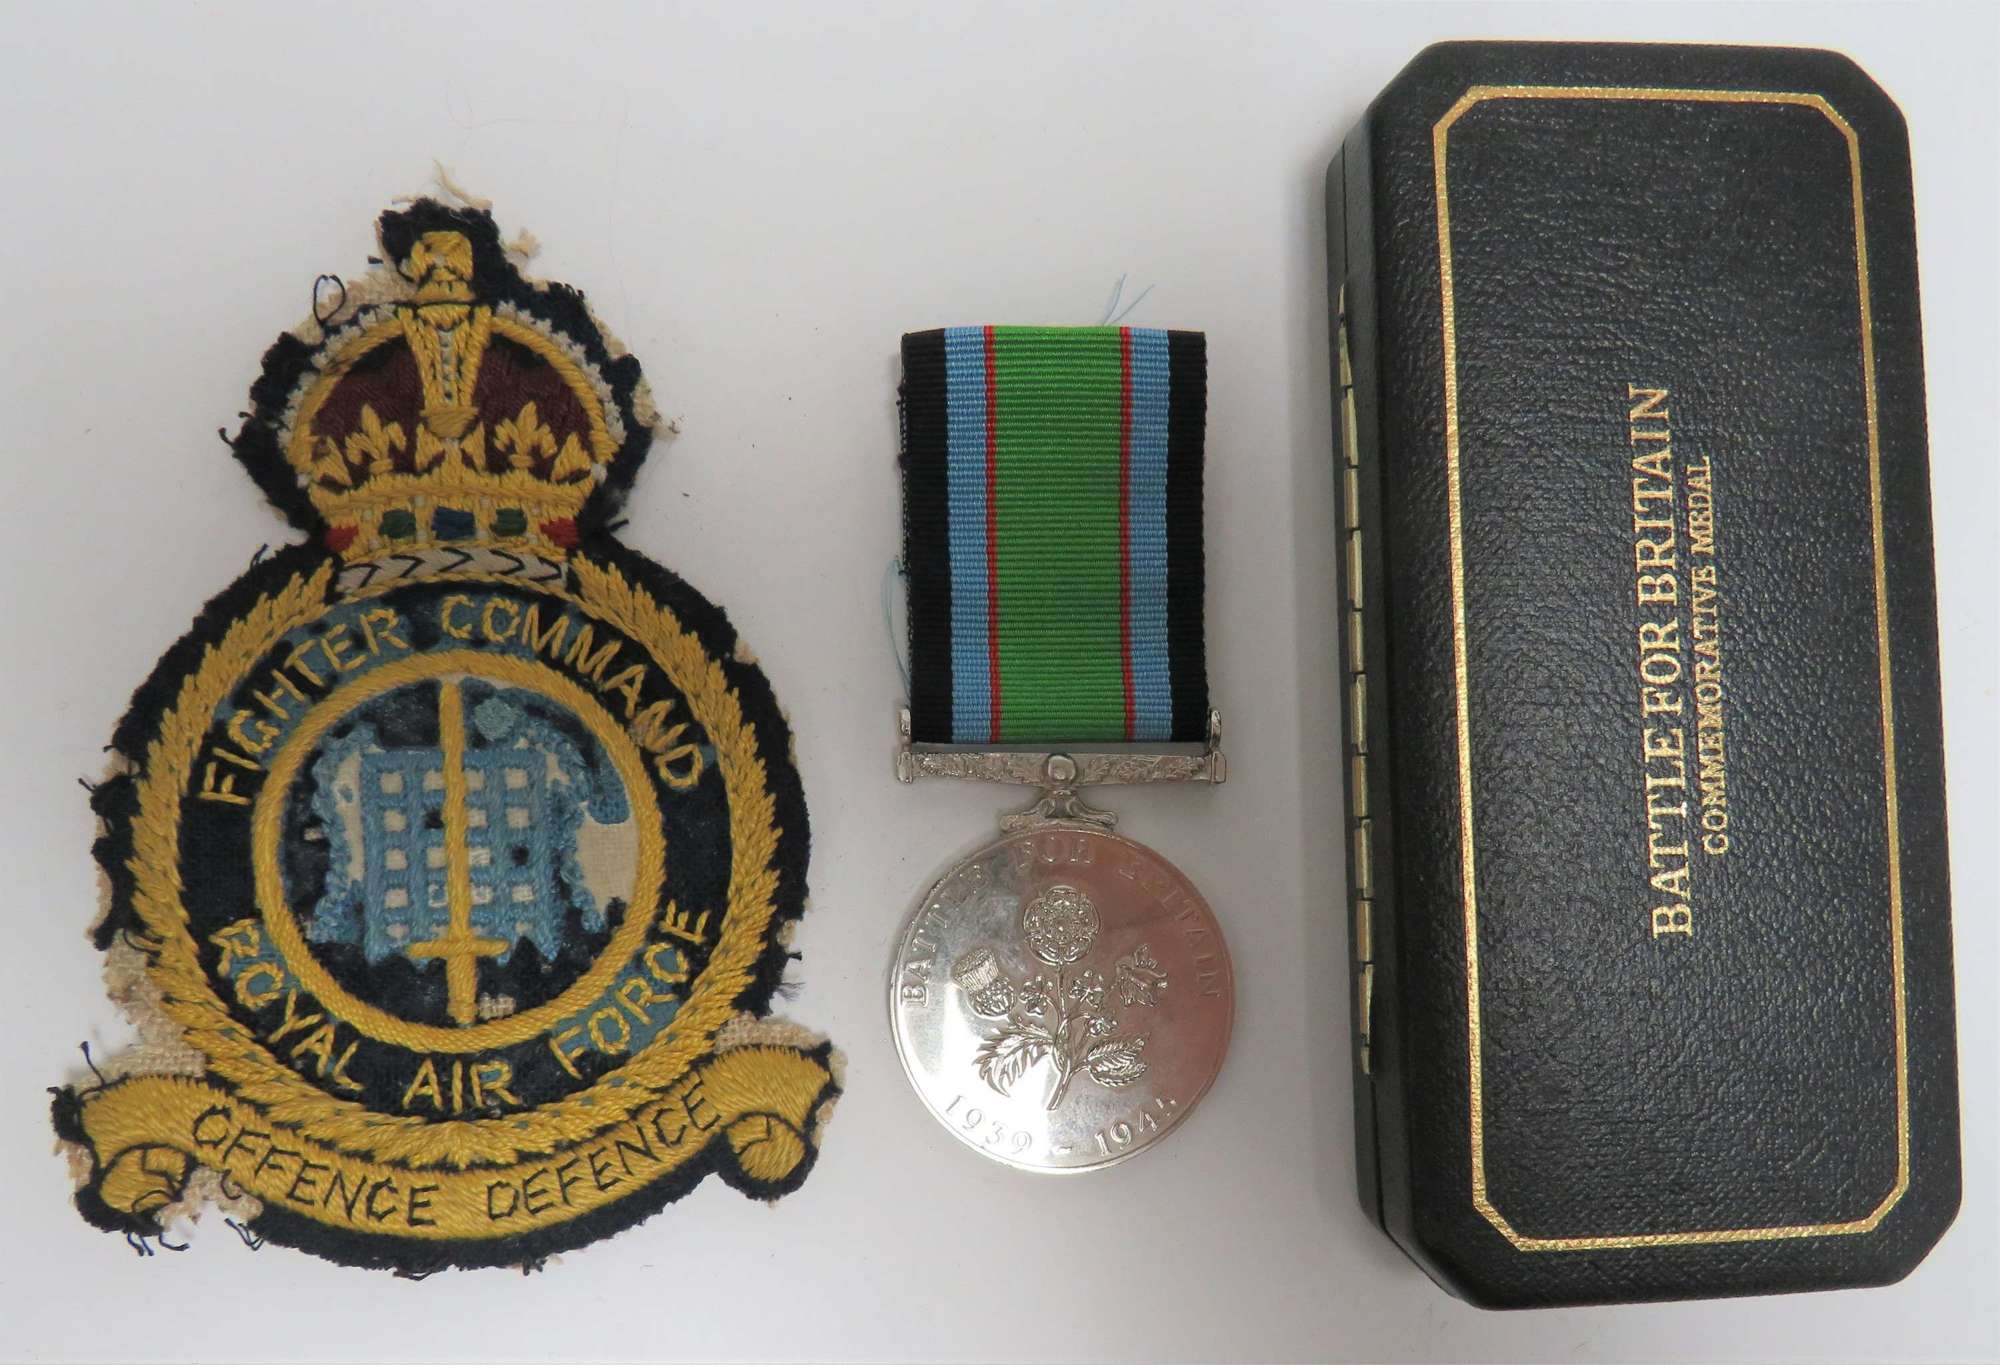 Battle of Britain Commemorative Medal and Fighter Command Badge